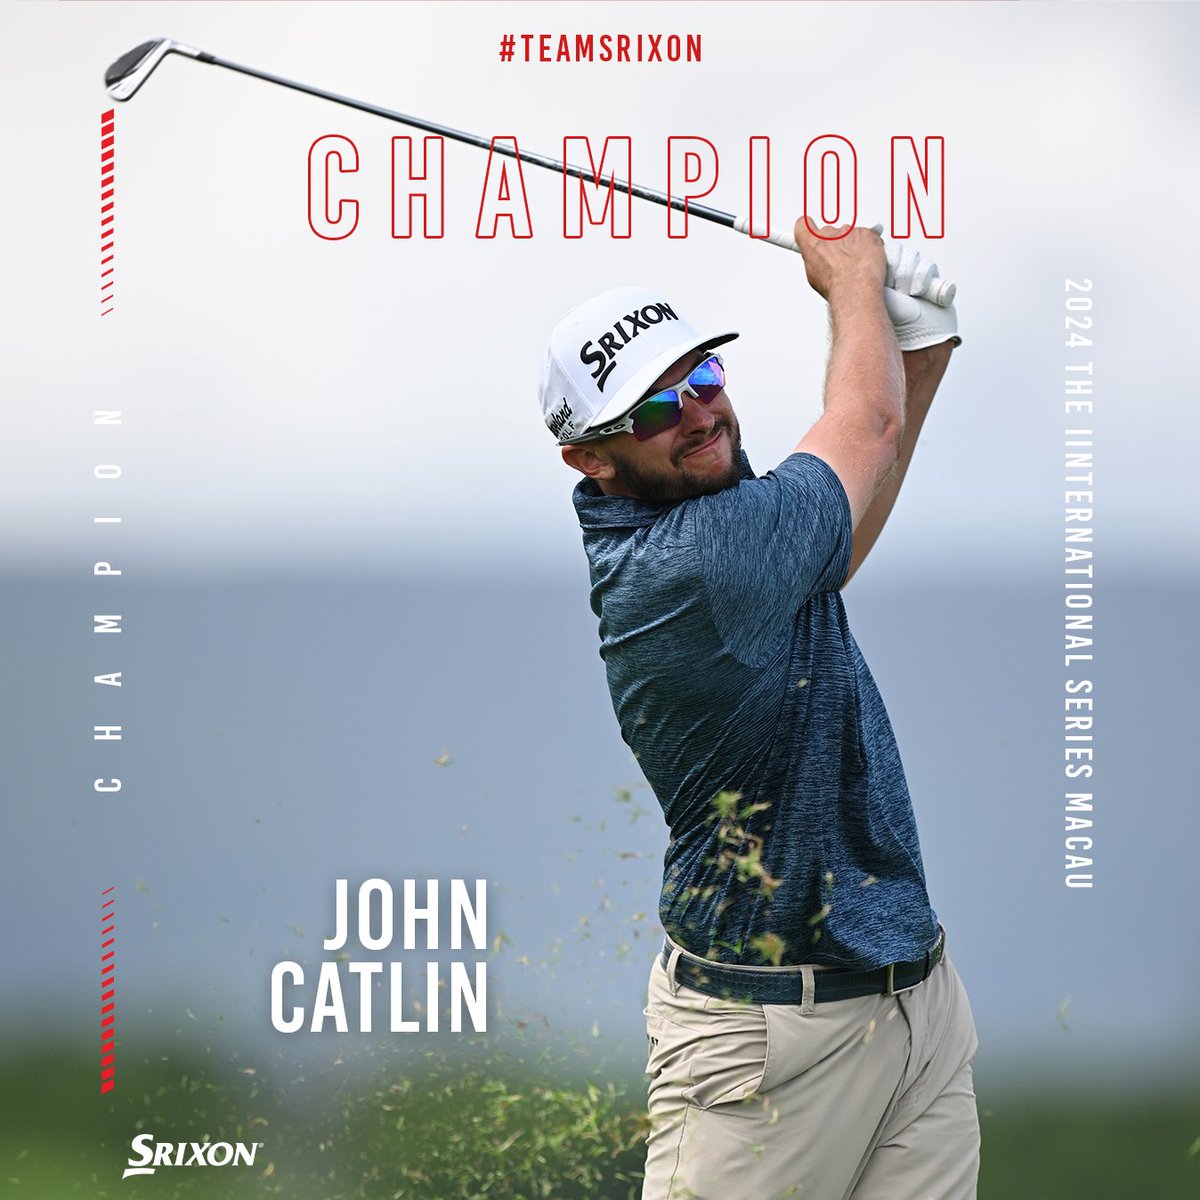 After scoring the first 59 in Asian Tour history during Round 3, @johncatlin59 gets the job done and earns his 5th career victory at The International Series Macau 🏆 #TeamSrixon